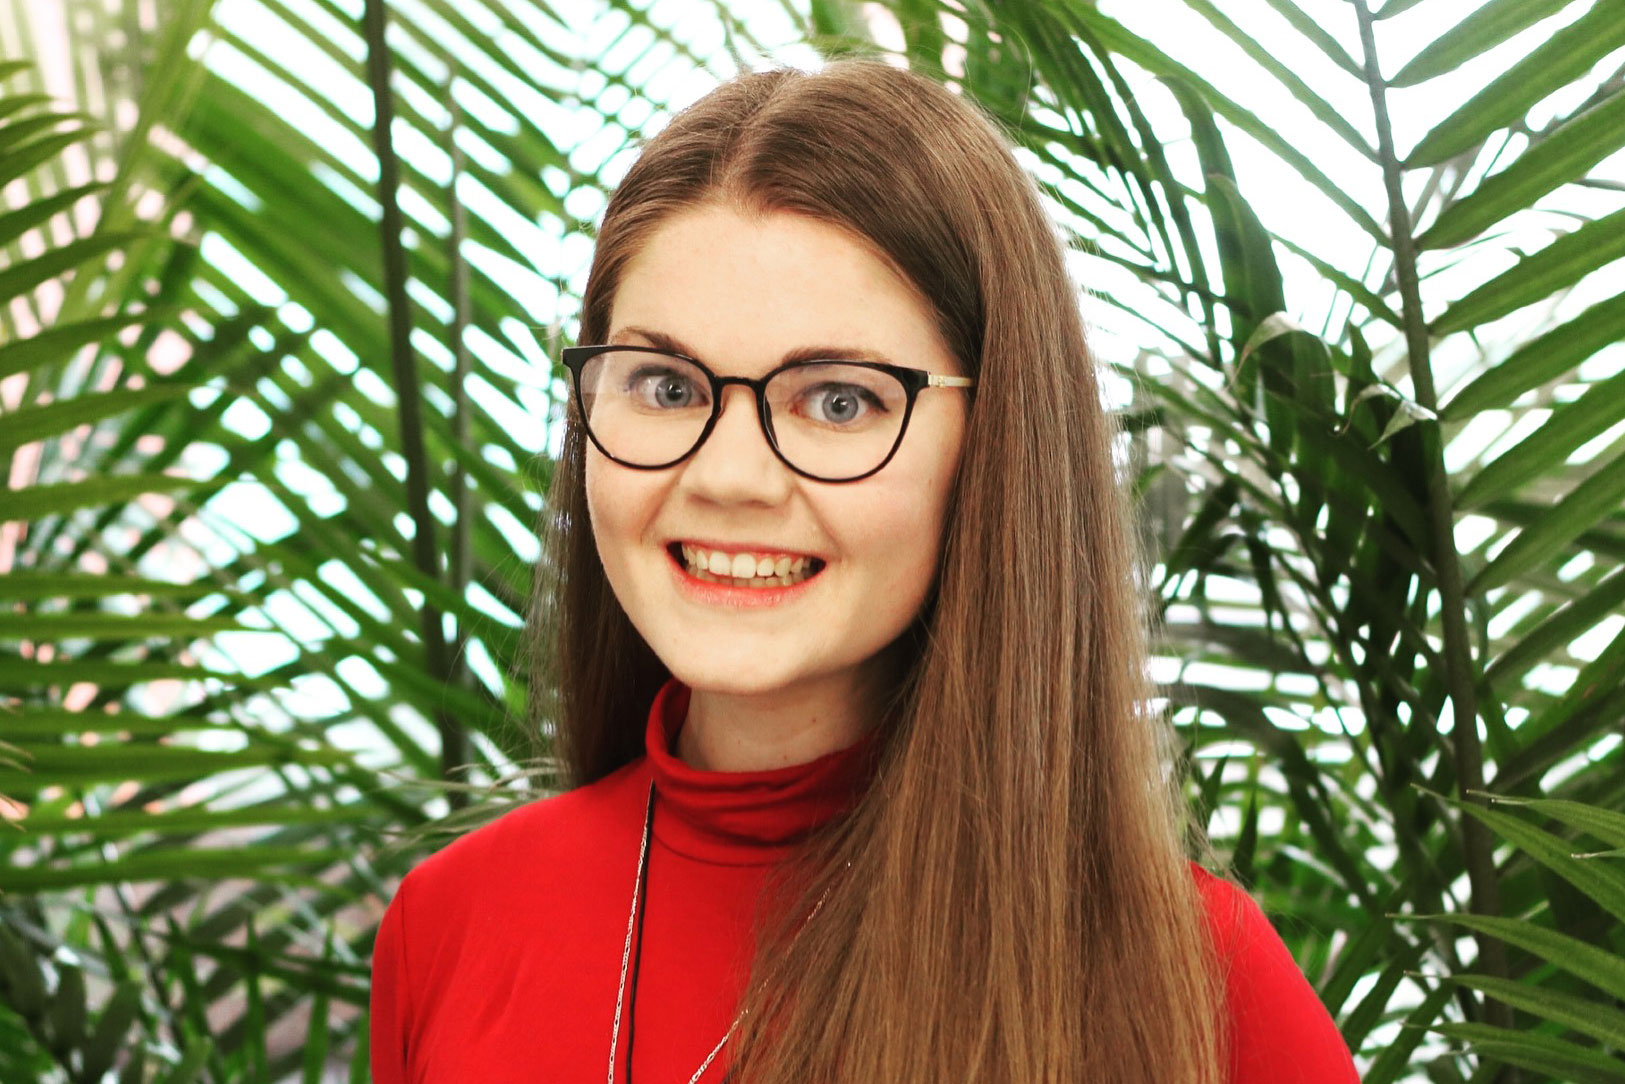 PhD student Elizabeth Campbell photographed from the shoulders up in front of a background of tropical plants. She is wearing a red sweater and glasses, smiling at the camera.